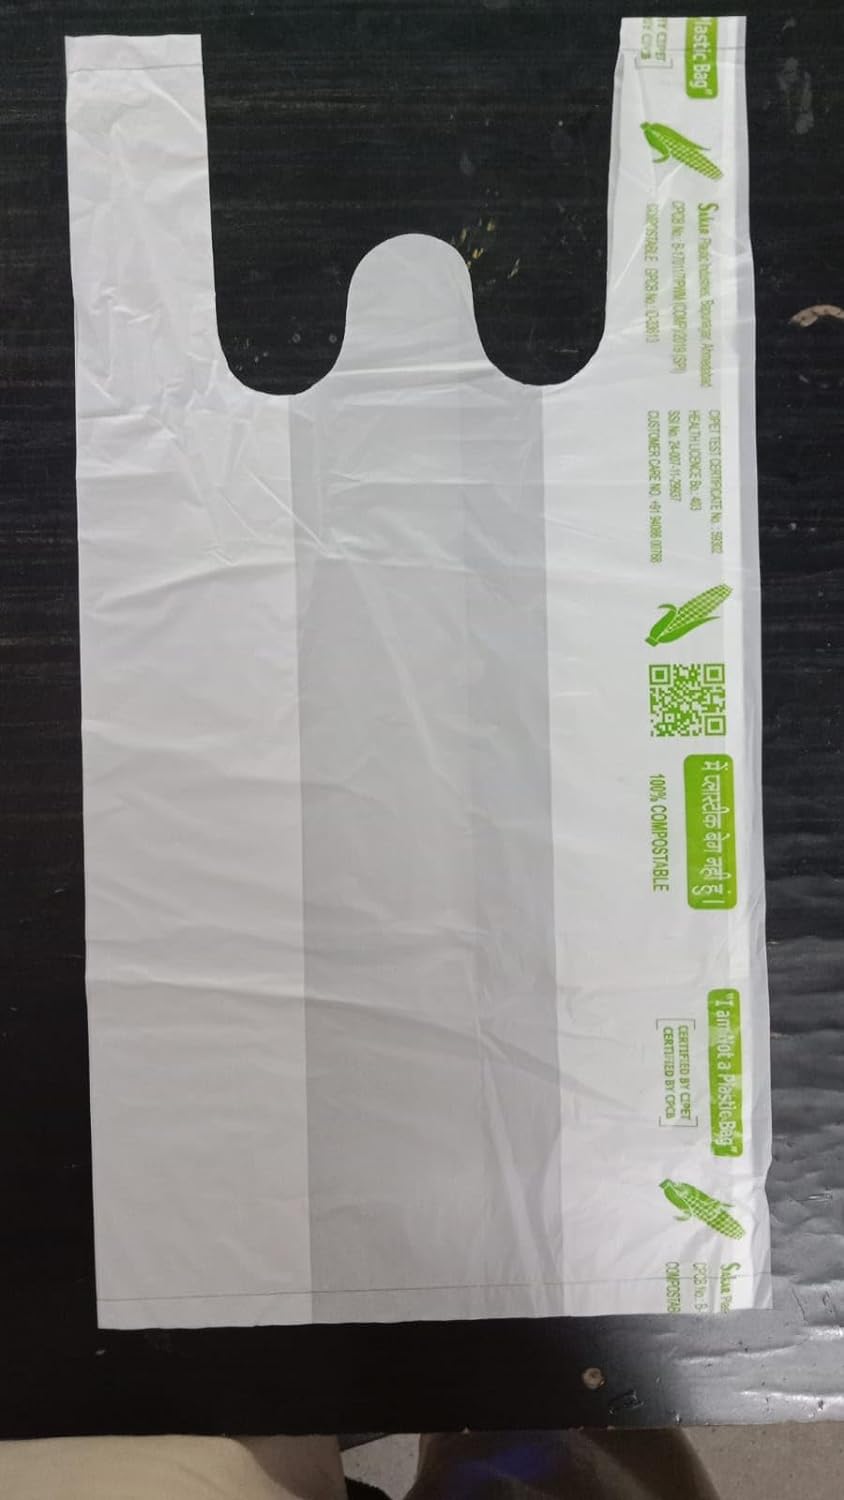 Biodegradable & Compostable Certified Eco-Friendly Carry Bags Length 16 inch Breadth is 8 inch (Gusset is 2.5 Each Side) (13x16) (10x12 Inch, 200)